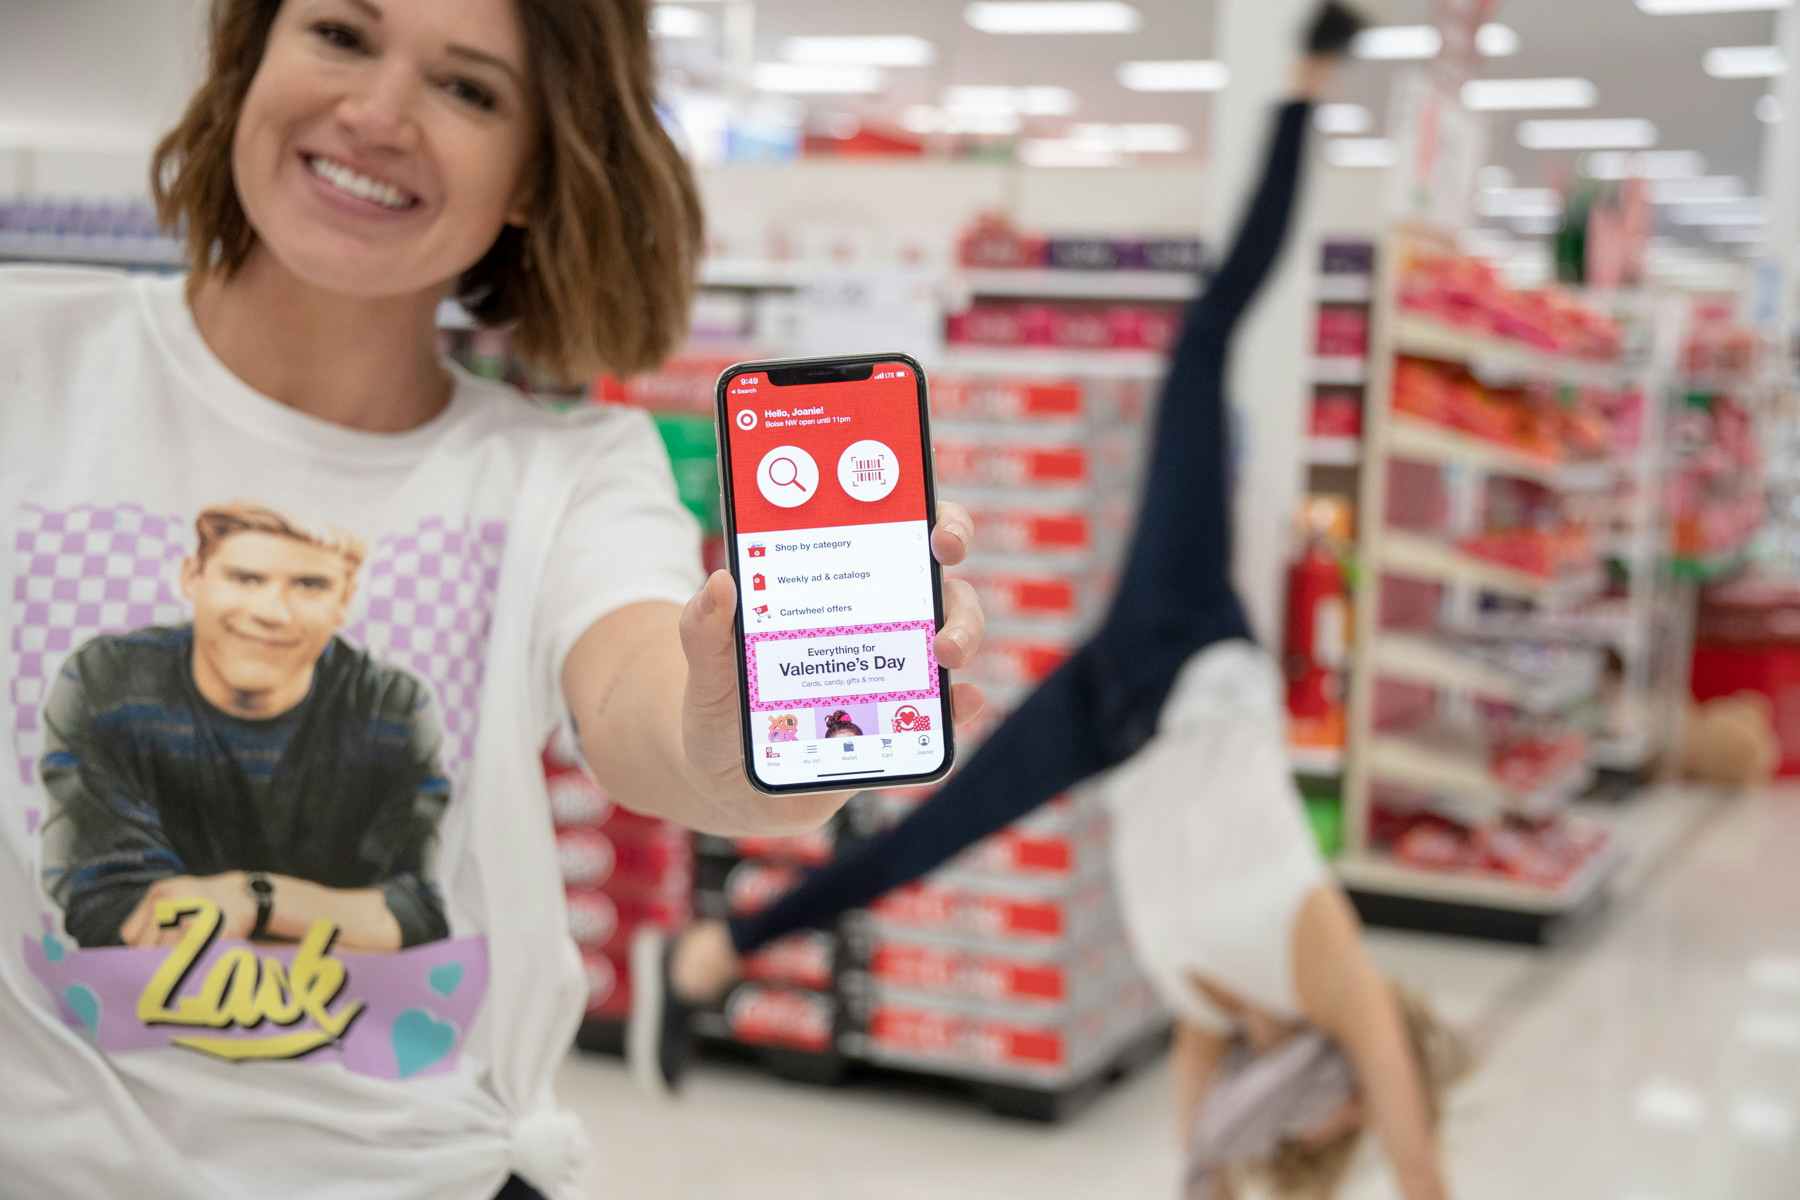 Don't forget to check for extra coupons in the "wallet" of your Target app.